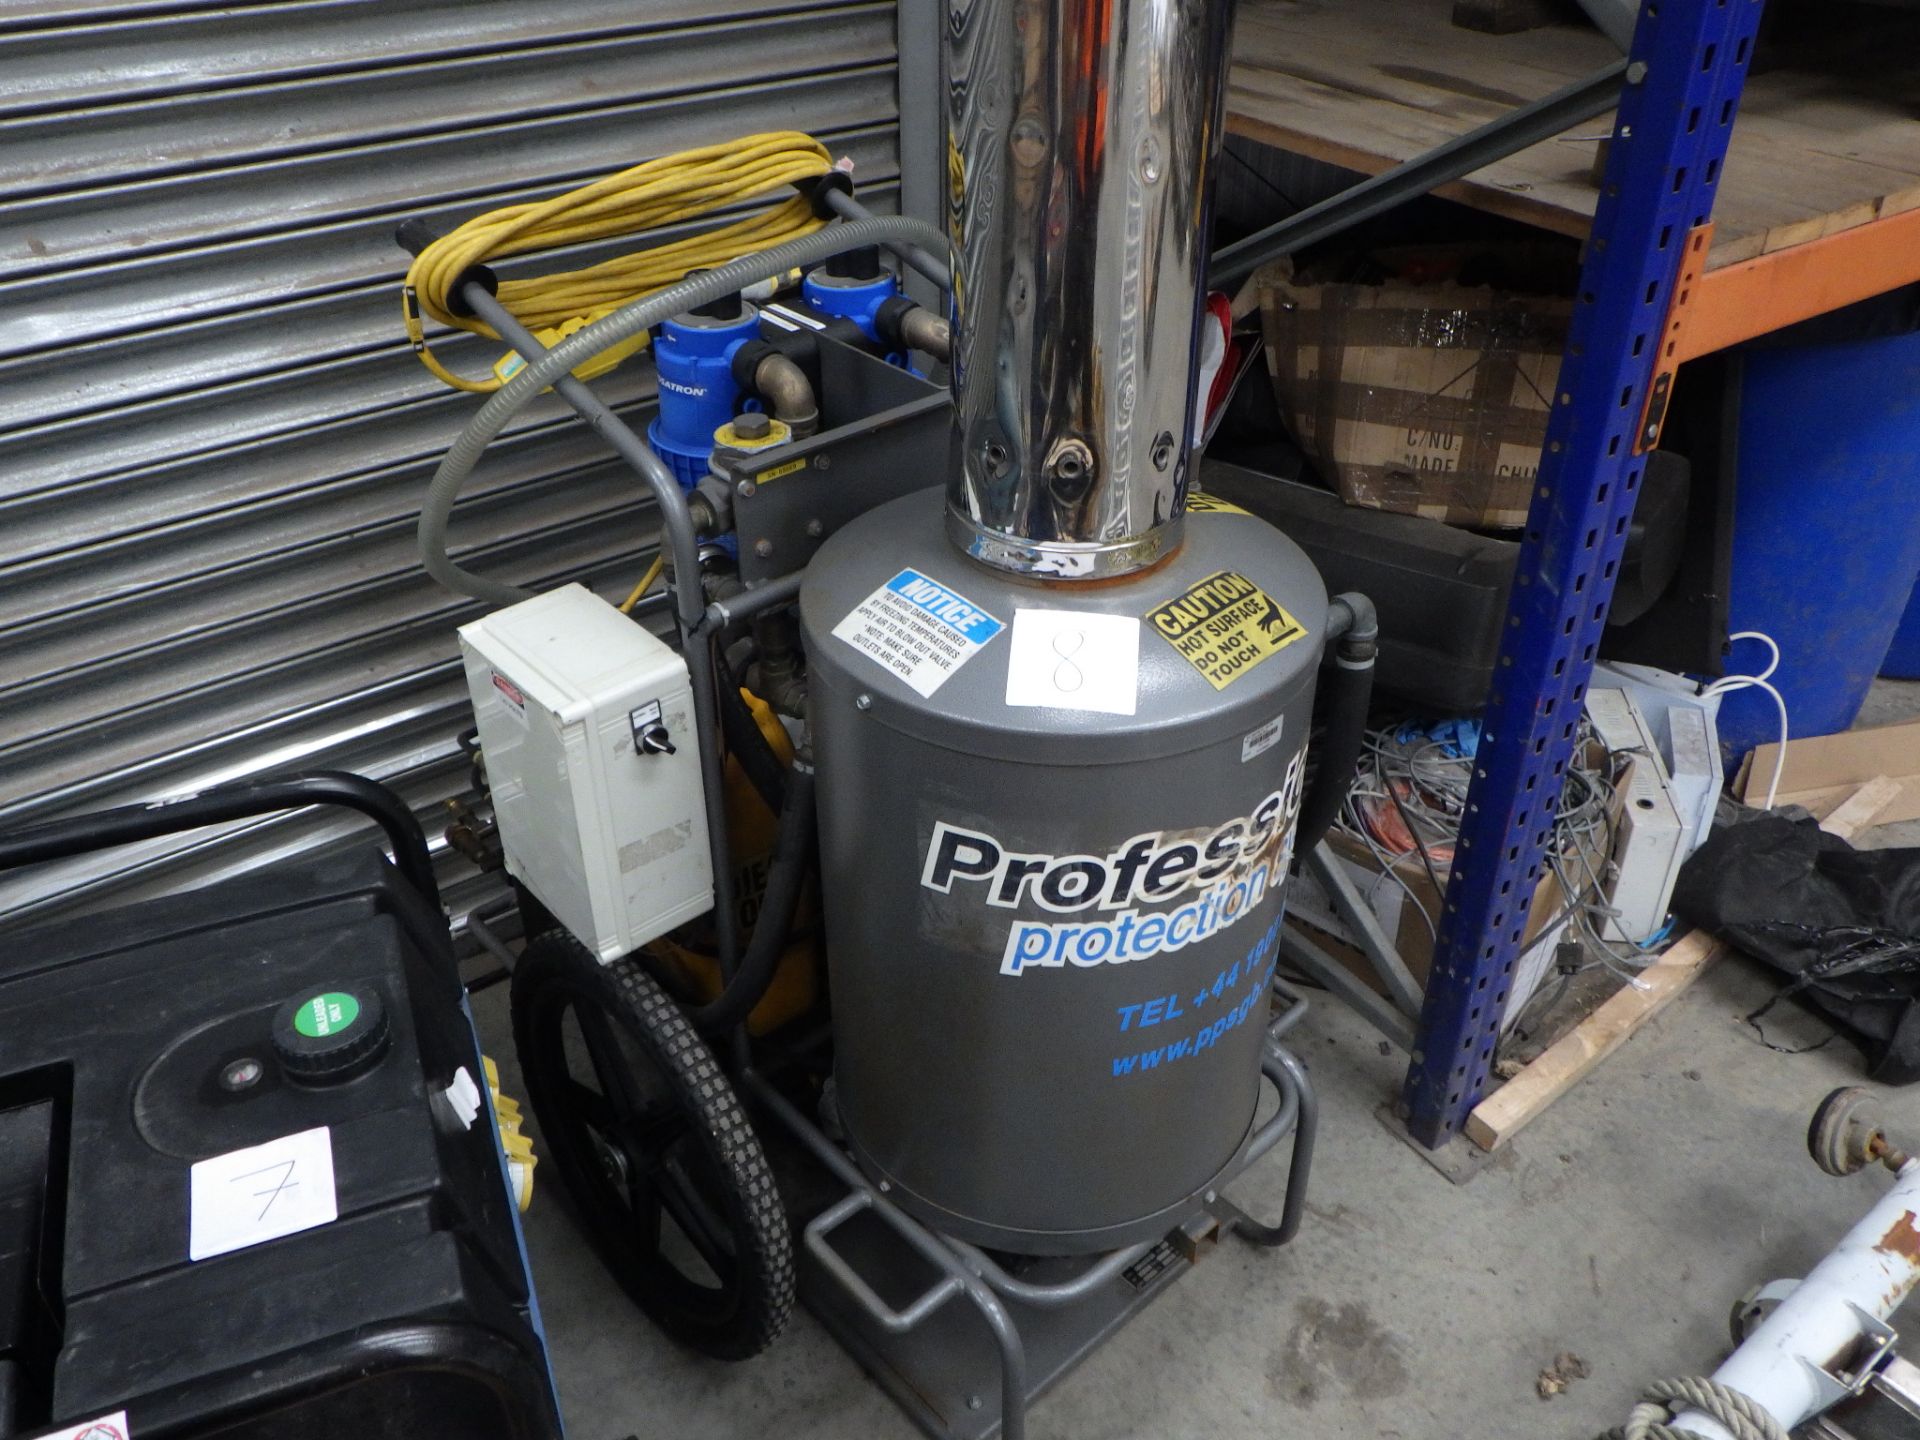 PROFESSIONAL PROTECTION SYSTEMS SF12-A-AC PORTABLE BOILER